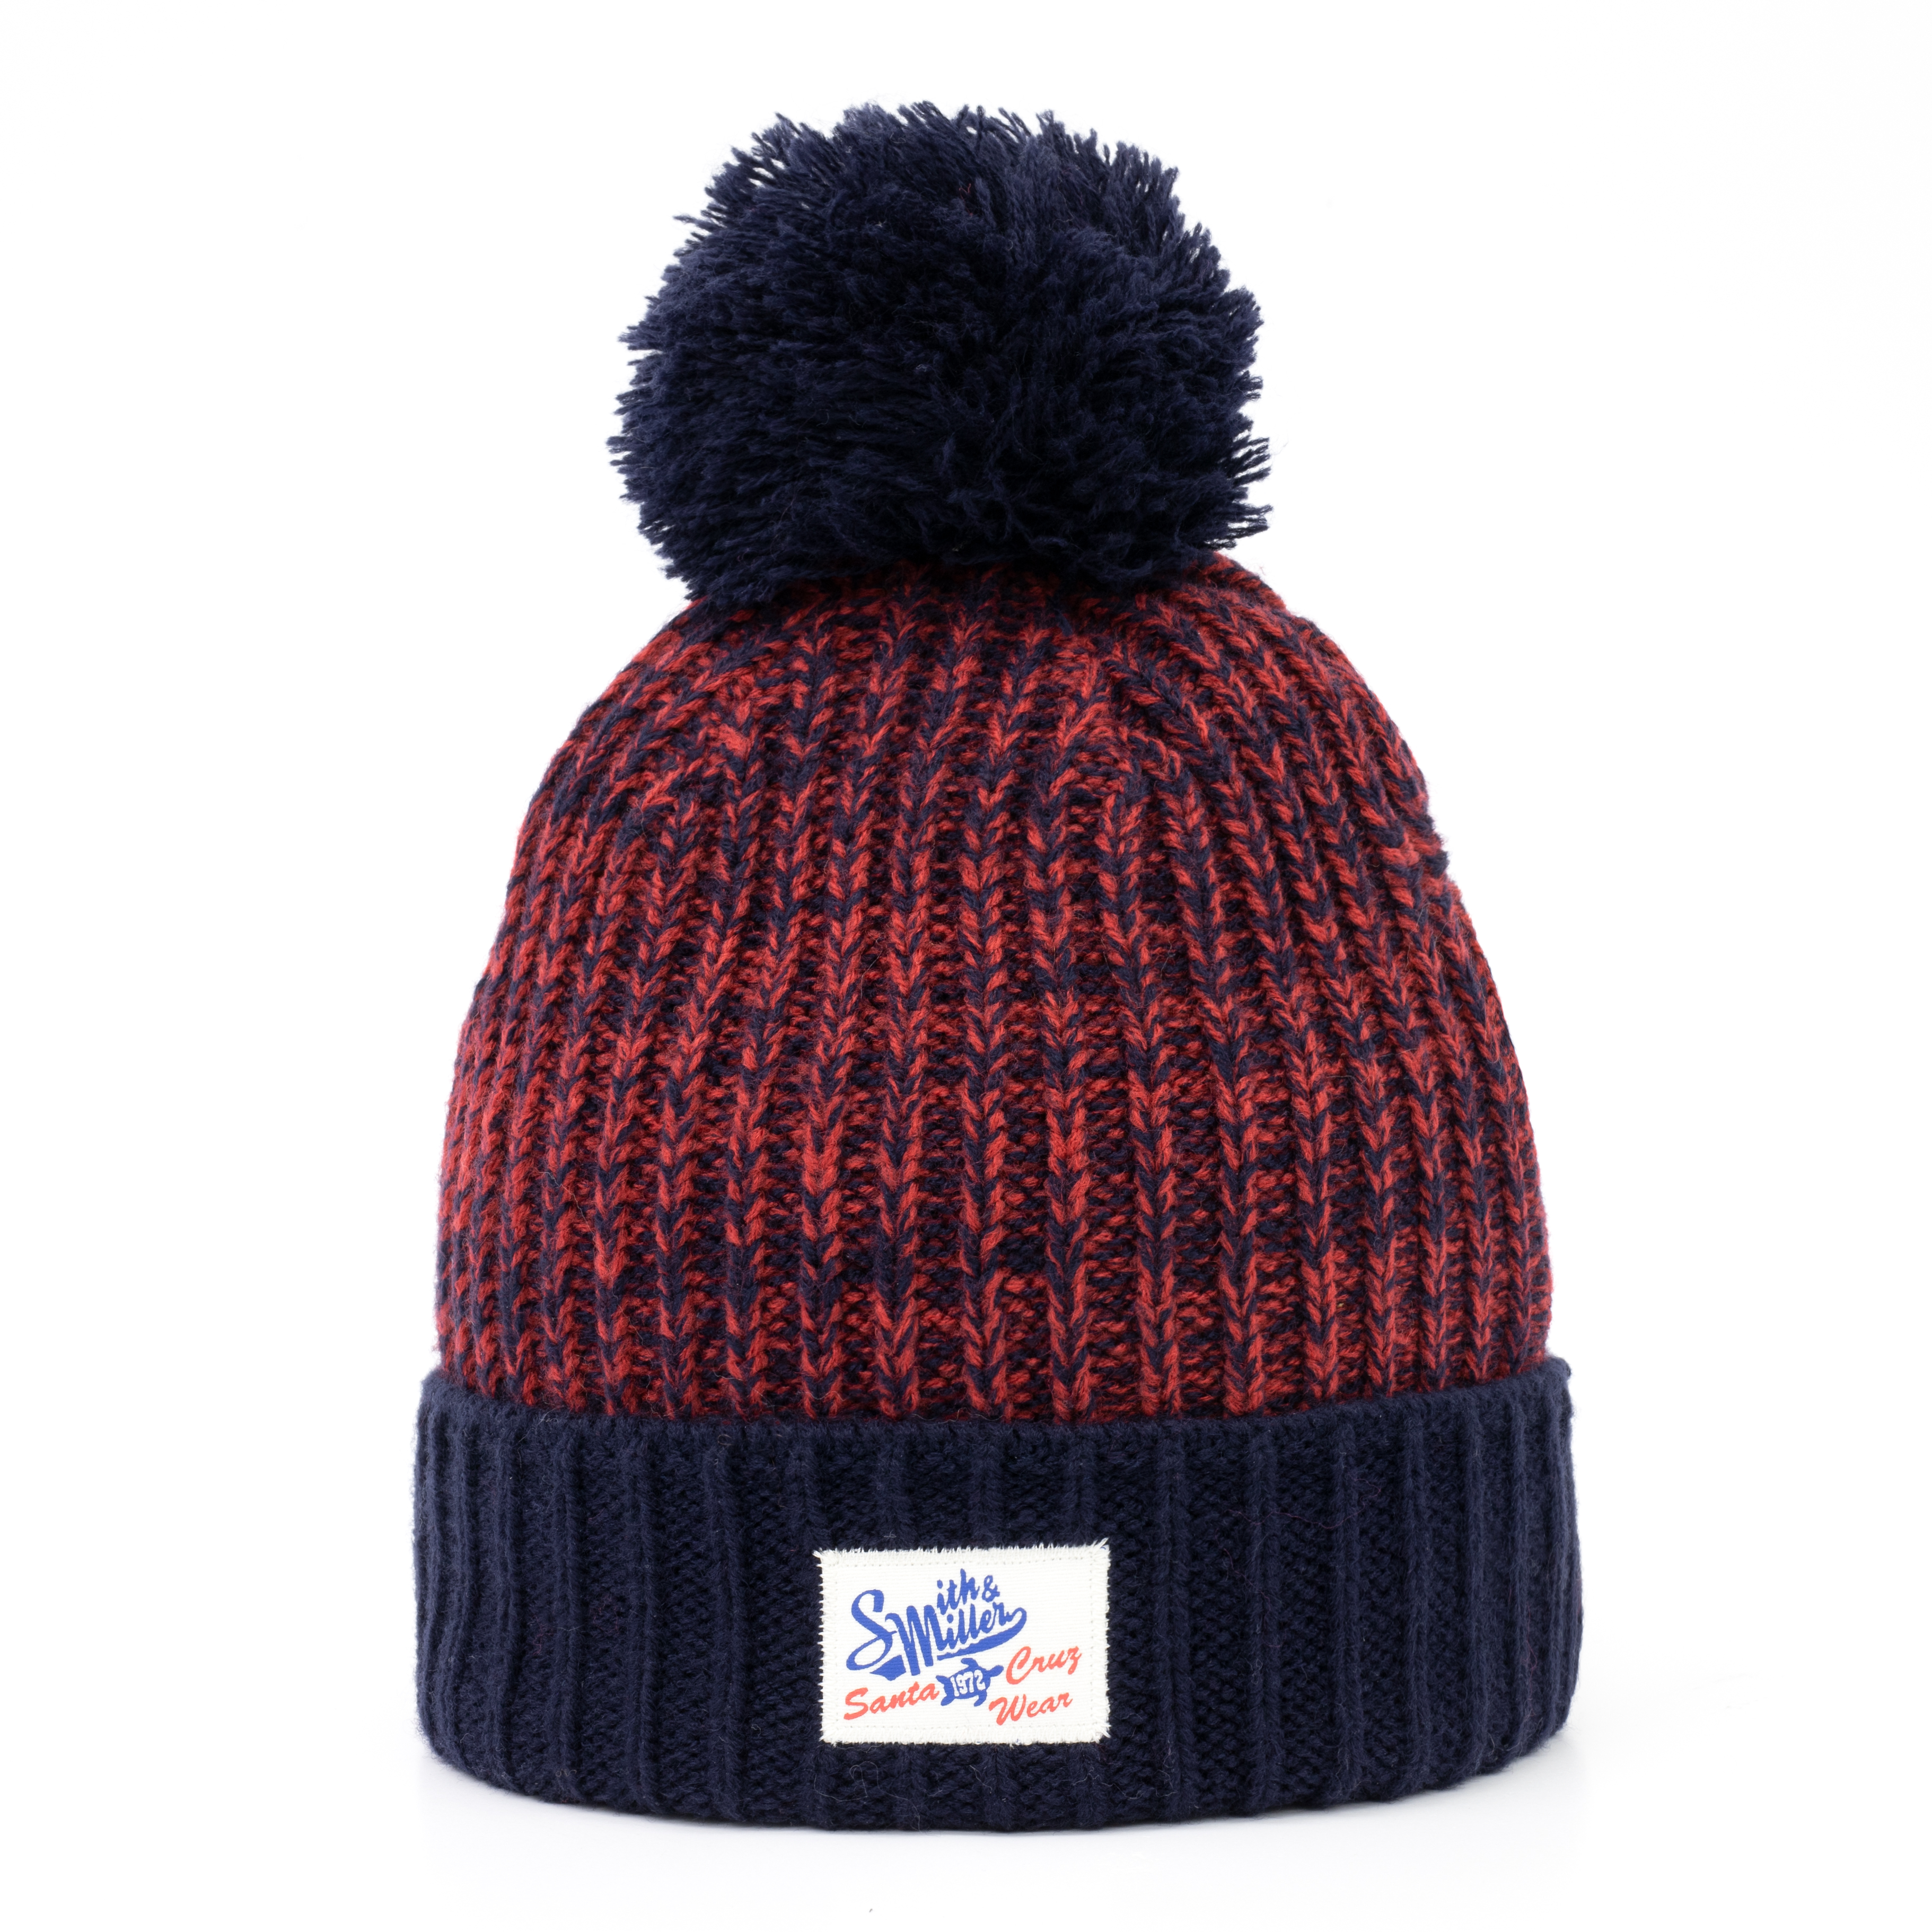 Smith & Miller Iver Beanie, navy/red